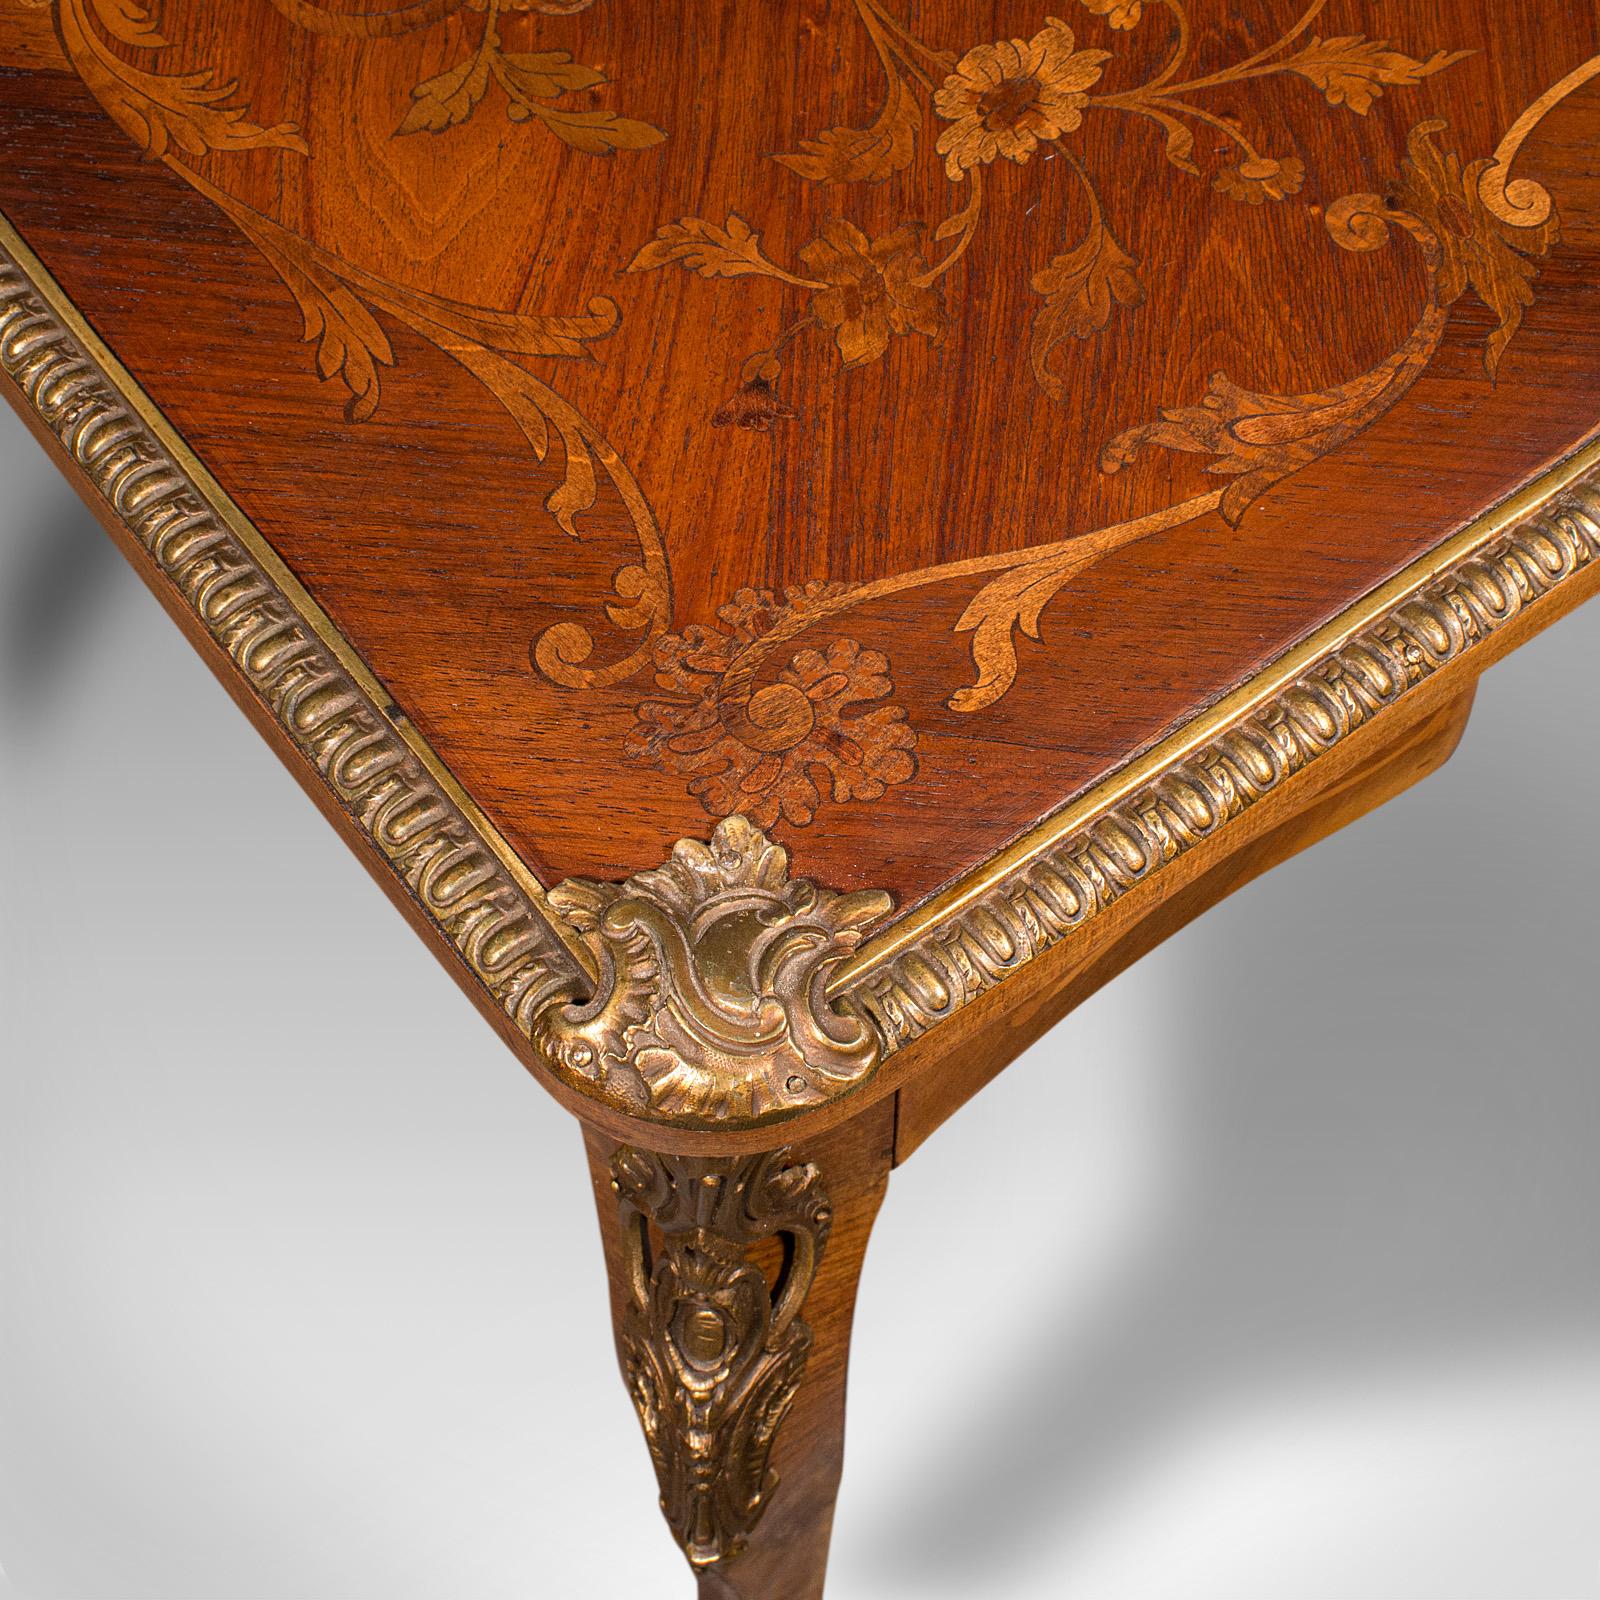 Antique Writing Desk, French, Decorative Centre Table, Louis XV Taste, Victorian For Sale 4